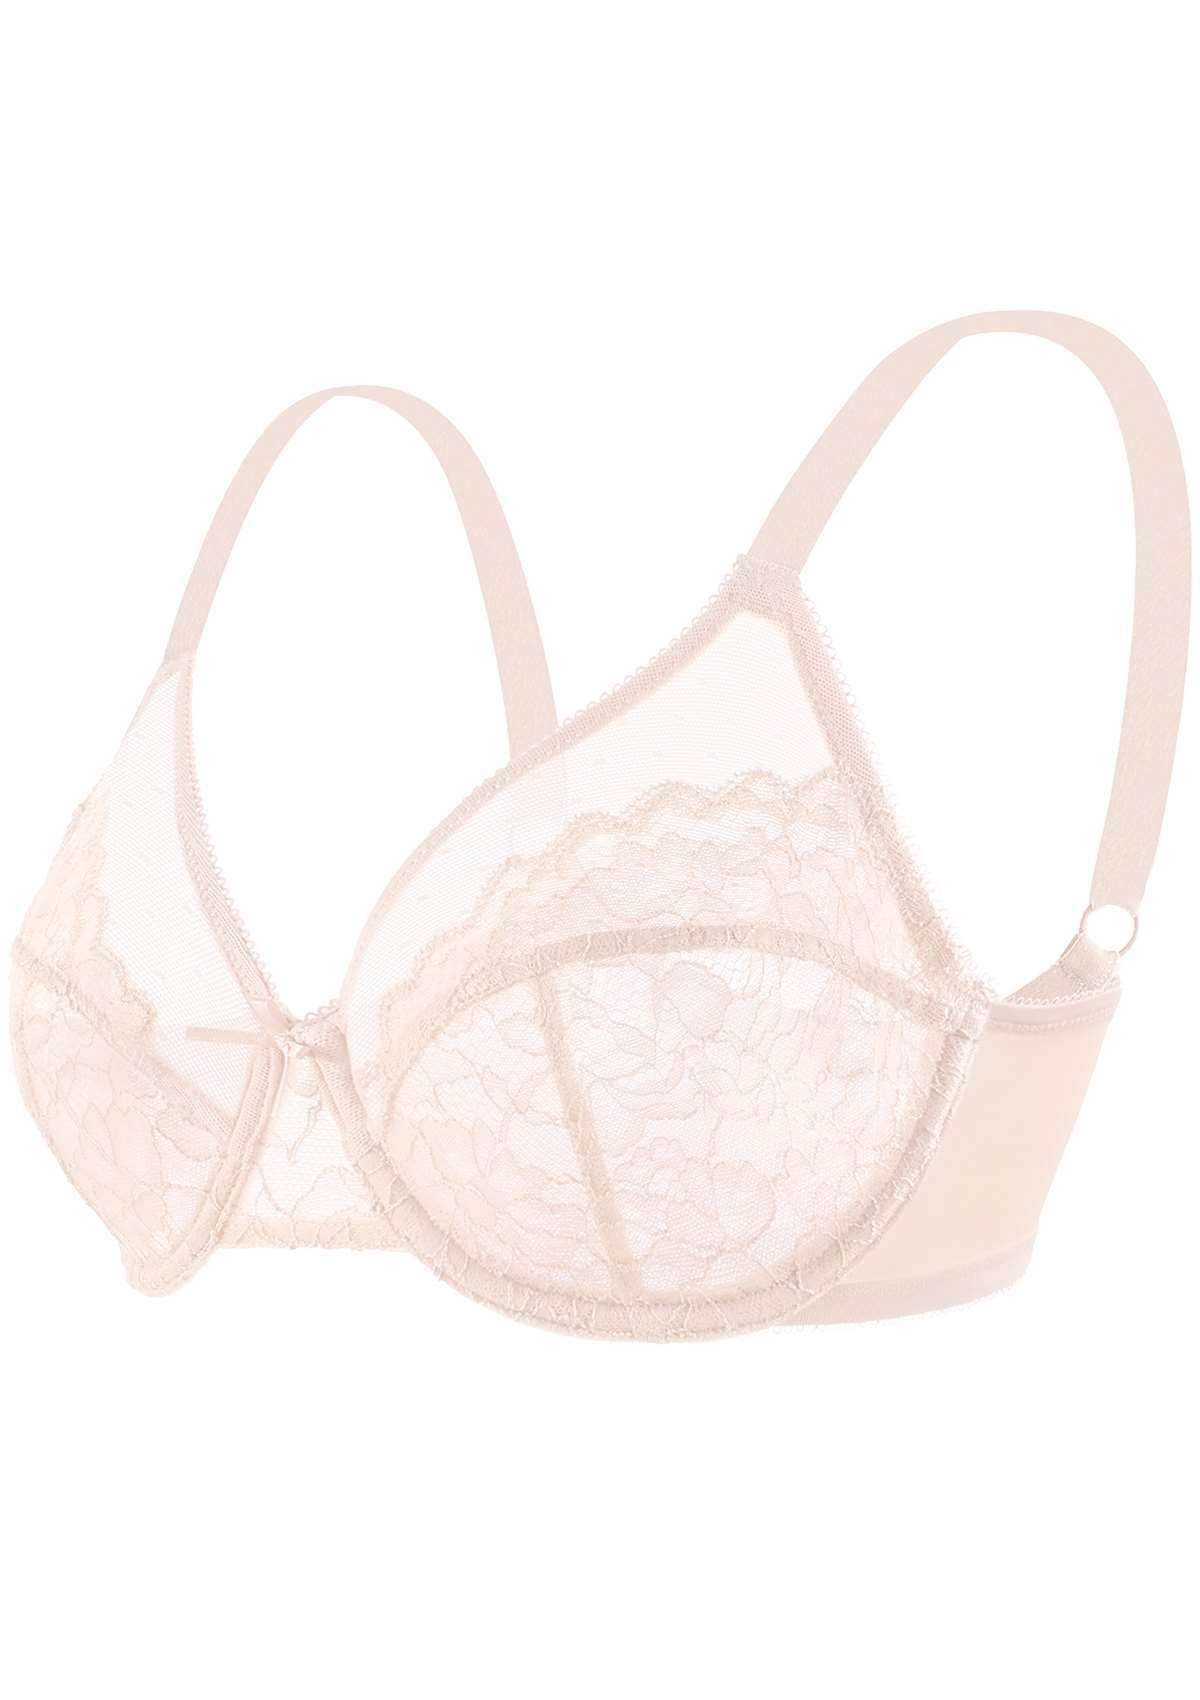 HSIA Enchante Lacy Bra: Comfy Sheer Lace Bra With Lift - Dusty Peach / 36 / H